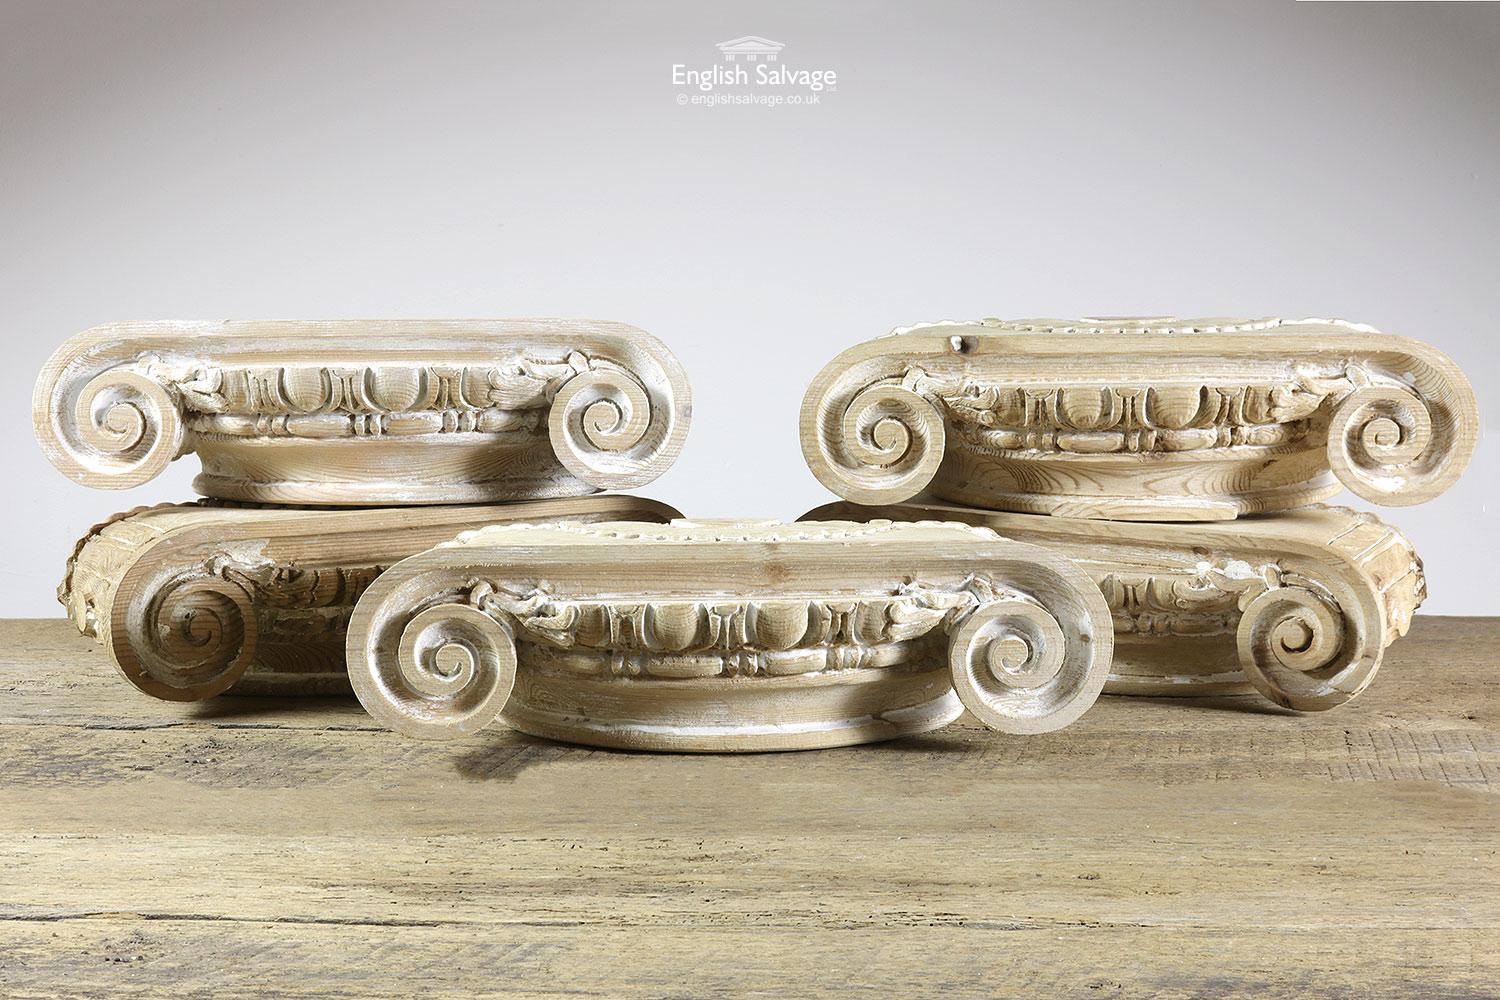 Reclaimed carved wooden capitals with egg and dart detailing between the scrolled ends and a semi-circular beading detail along the top. Few splits and dings to edges.